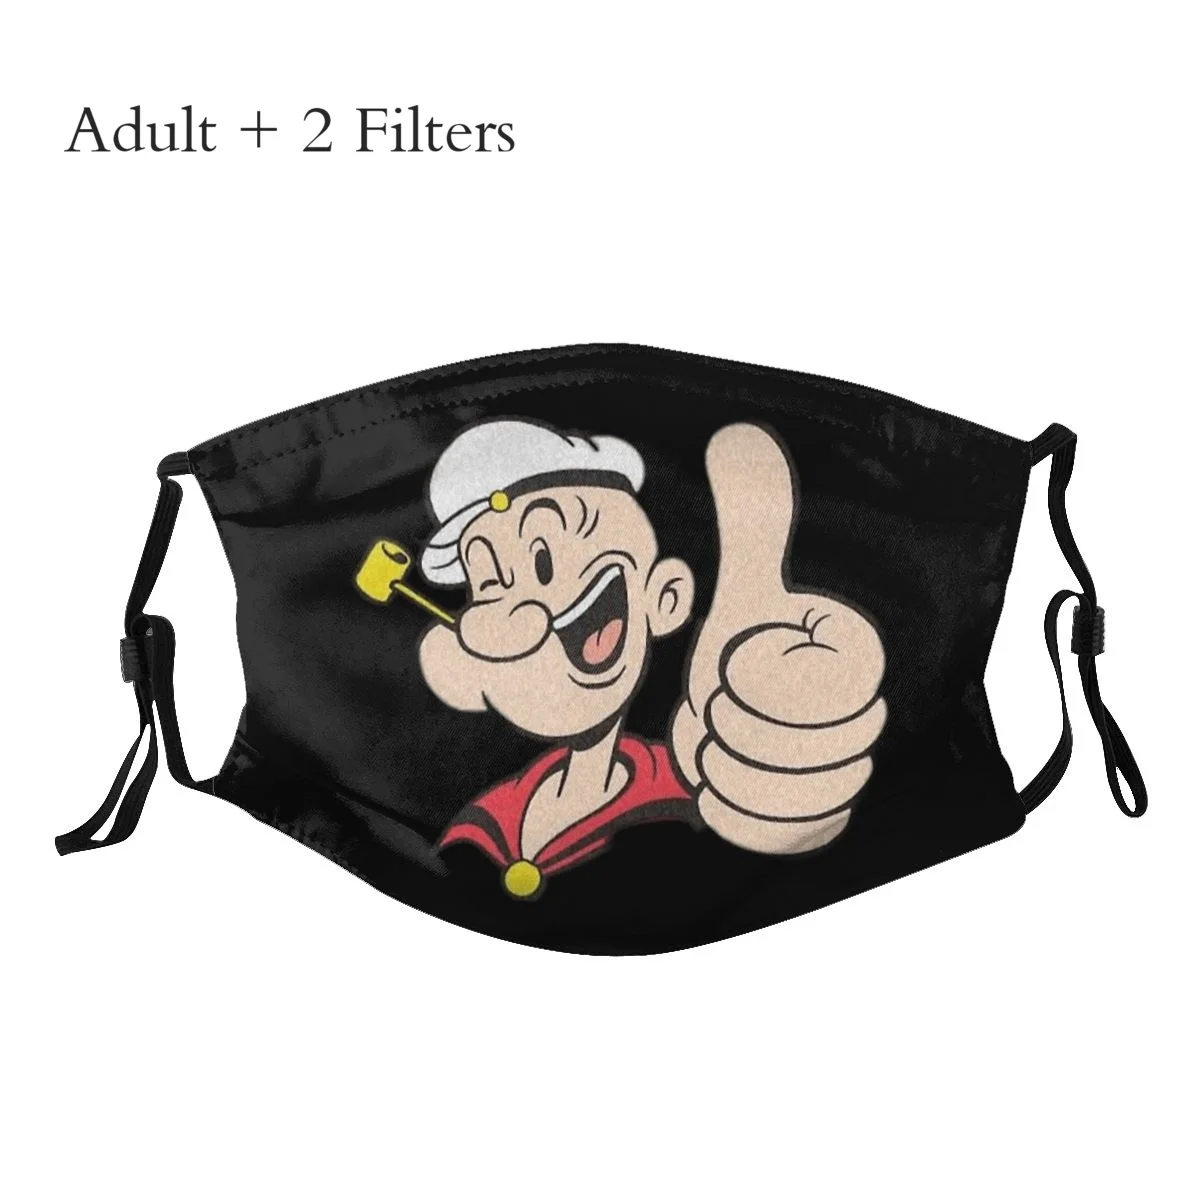 

Popeye The Sailor Man Cartoon Newest Mask Classic Maseczka Colored Universal Reutilizable Warm With PM2.5 Filters